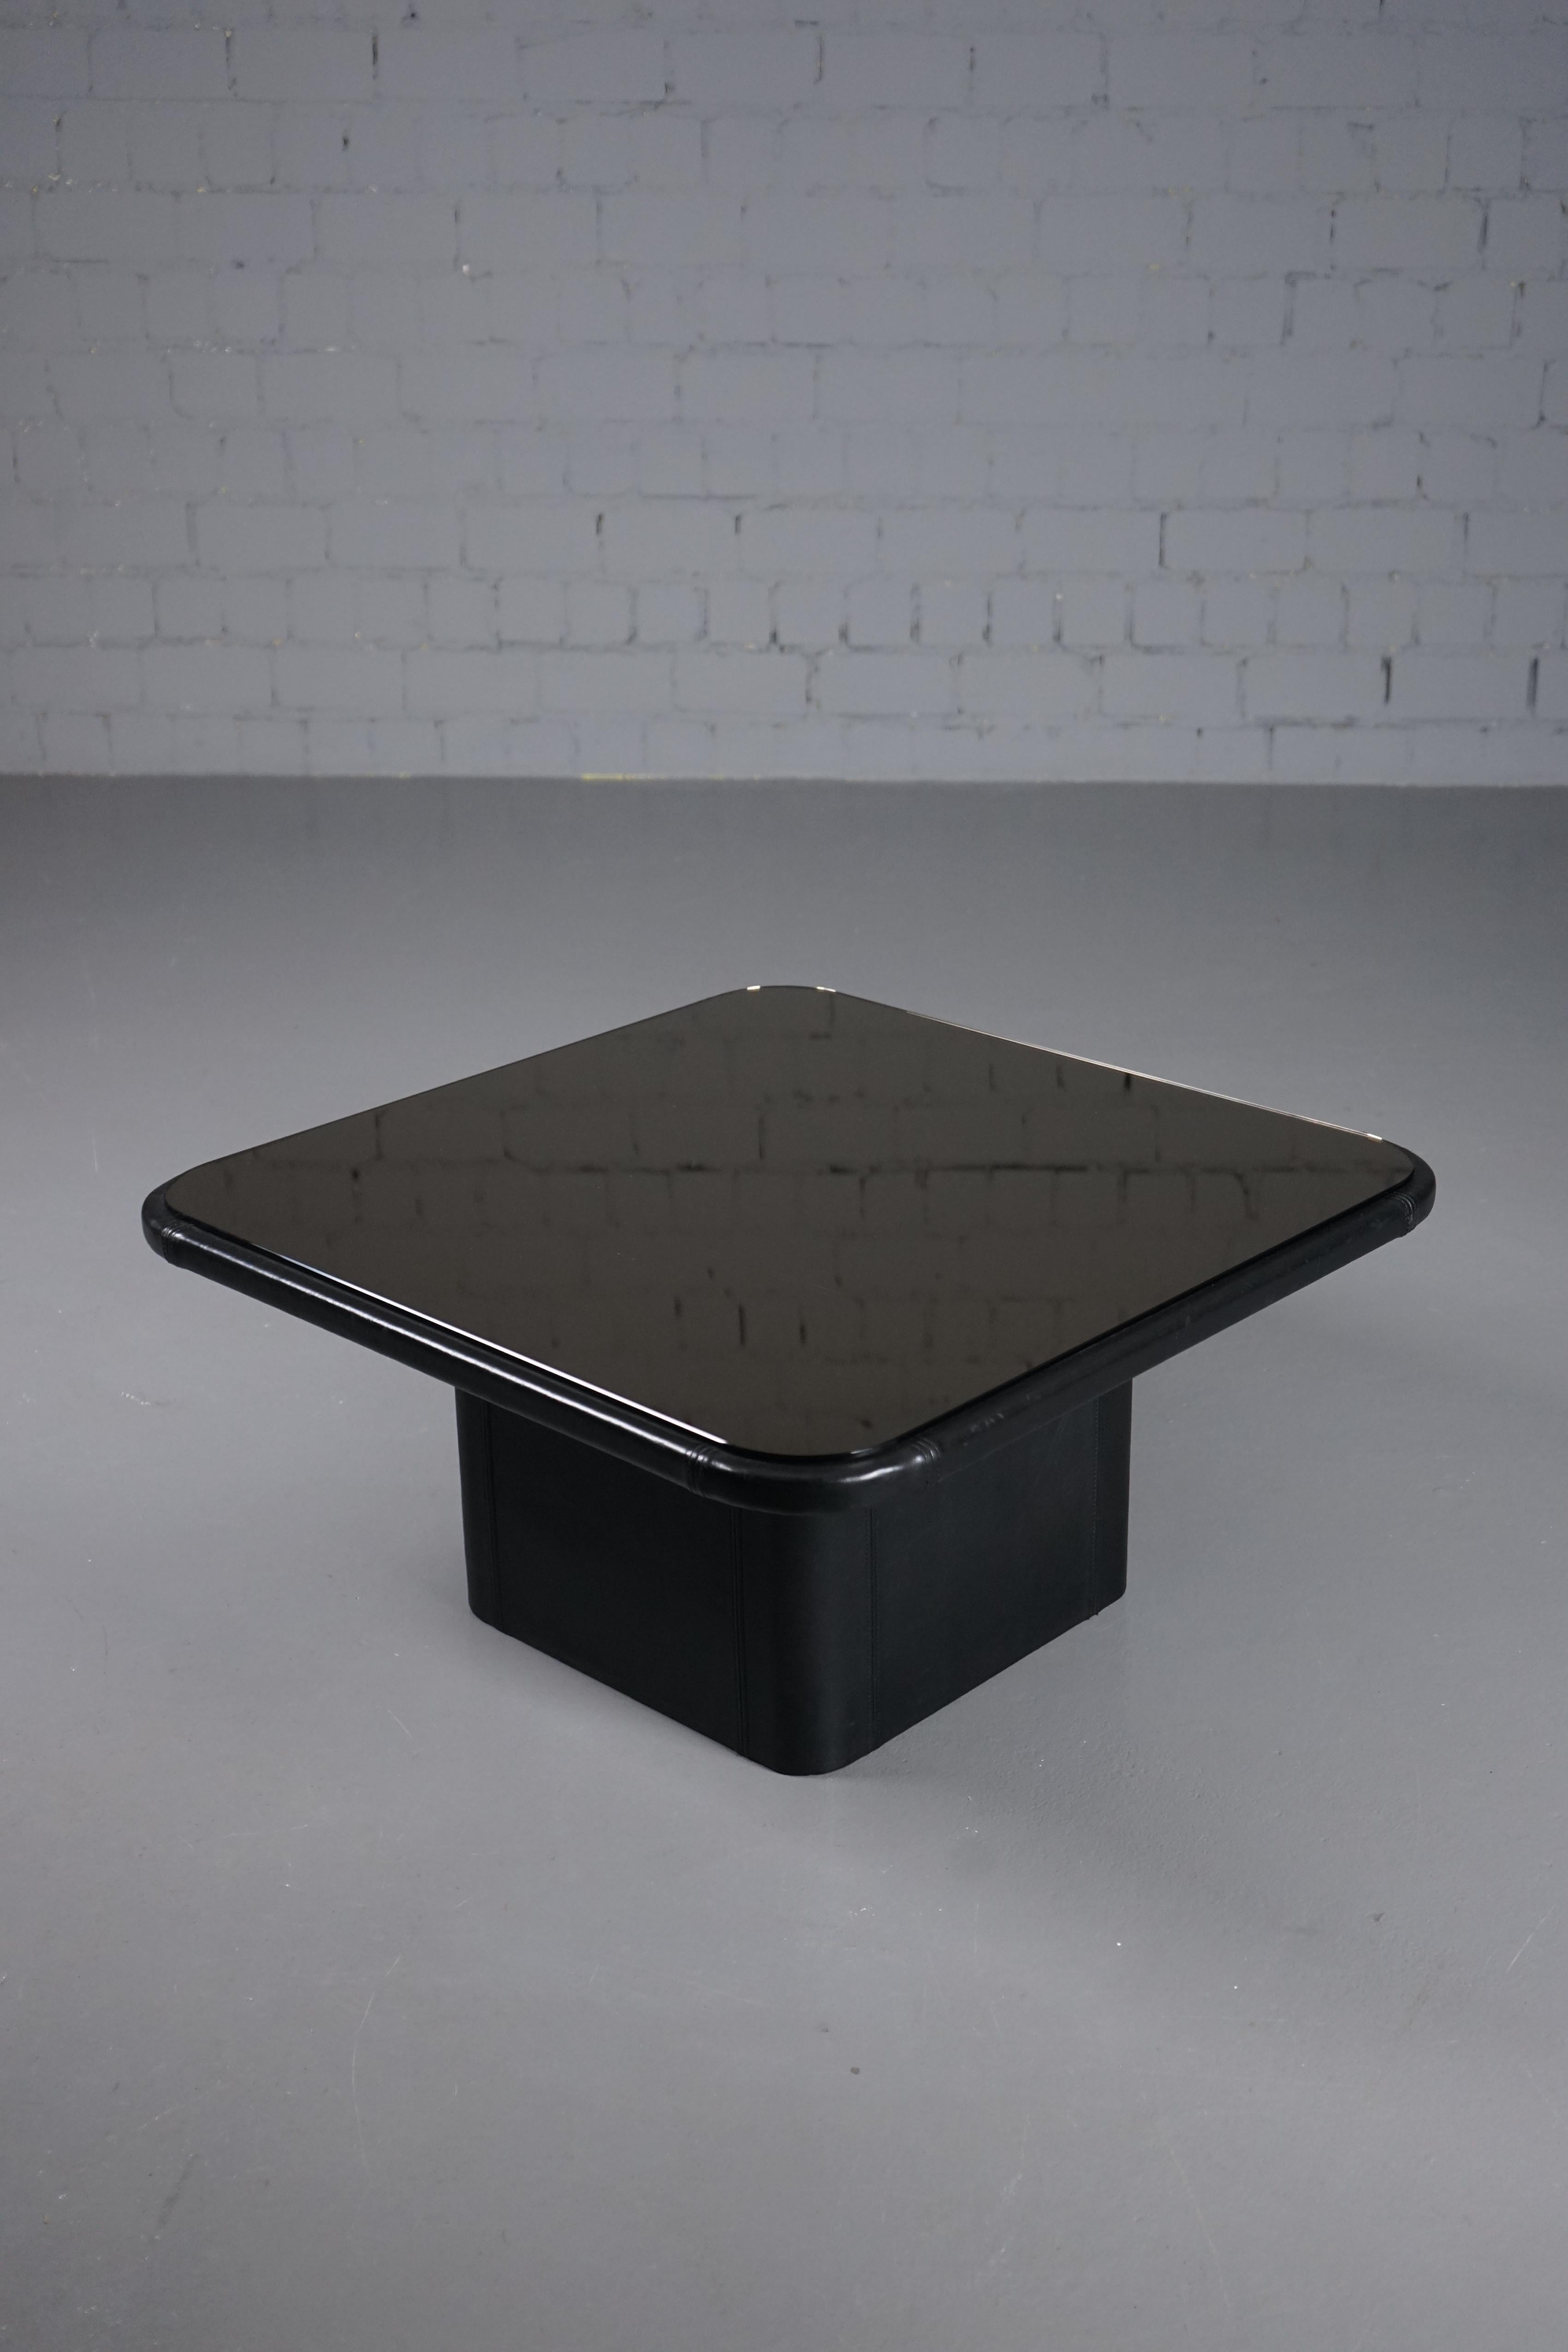 DS 3011 Coffee Table with Mirror Glass & Leather from De Sede, 1970s For Sale 3